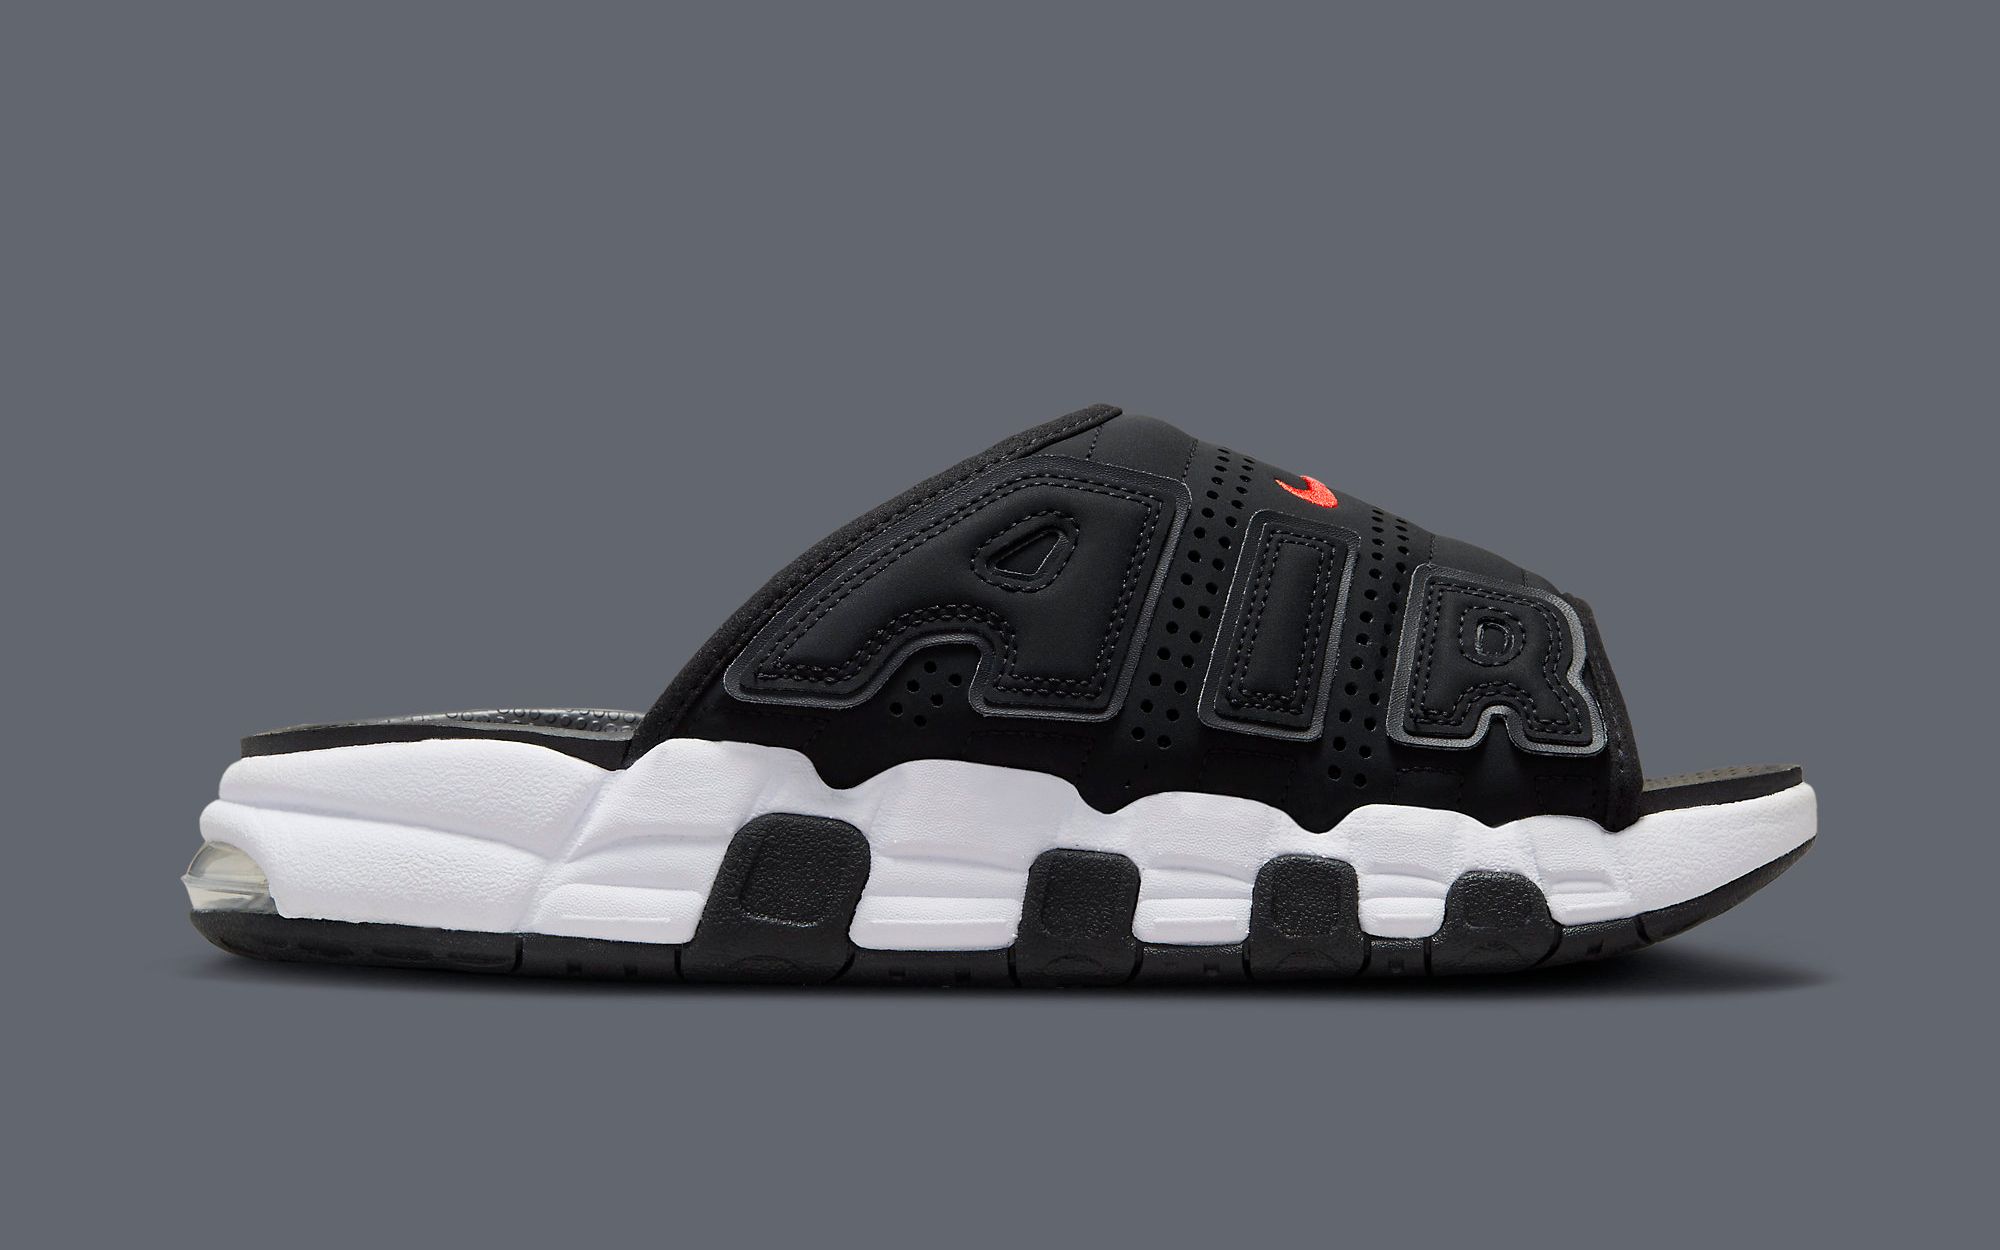 First Looks // Nike Air More Uptempo Slide “Black Infrared